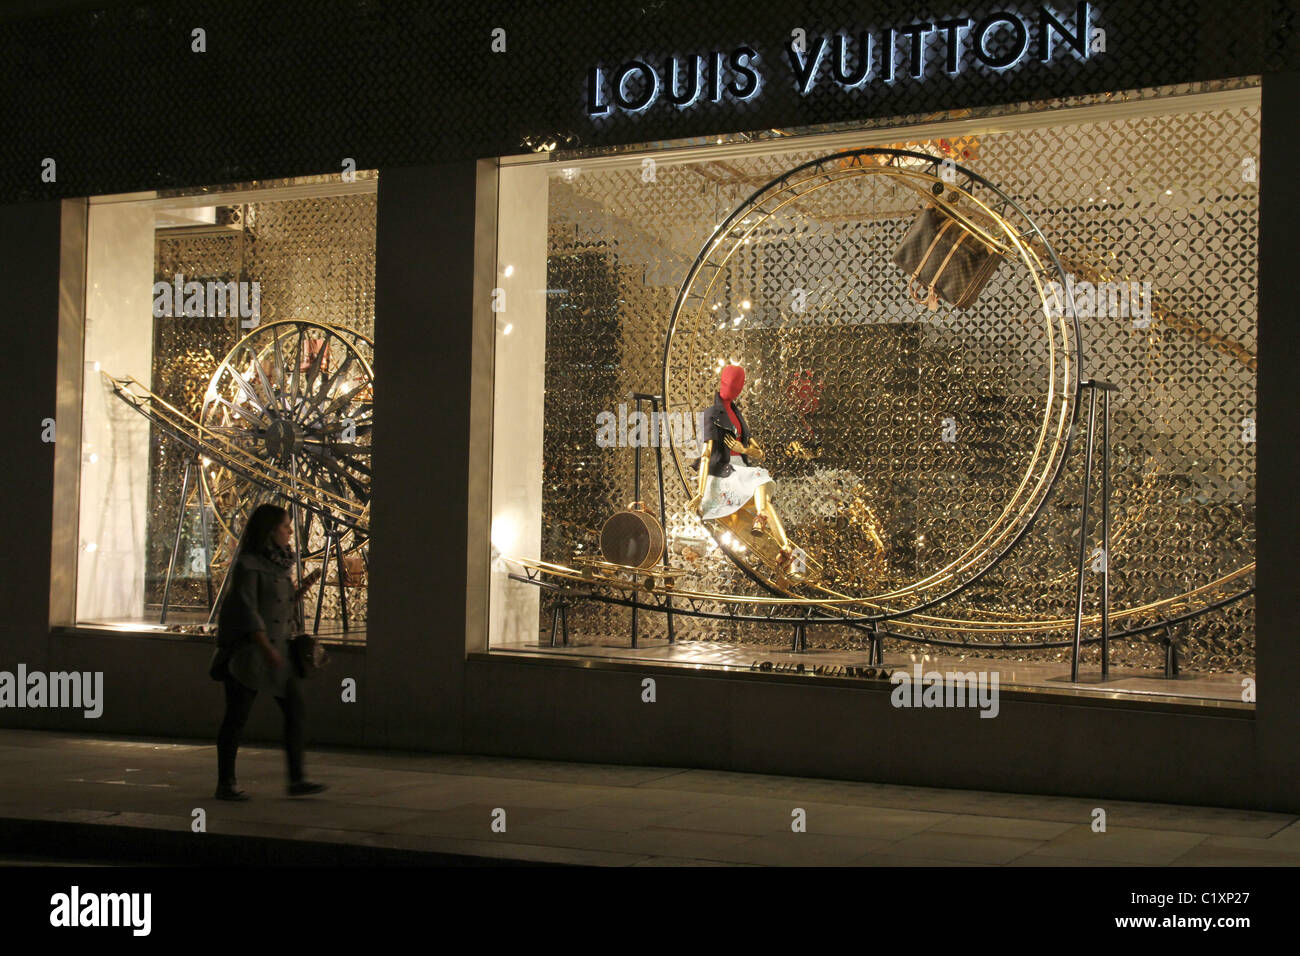 Louis Vuitton Luxury Shop in New Bond Street London United Kingdom  Editorial Image  Image of capucines company 193407140